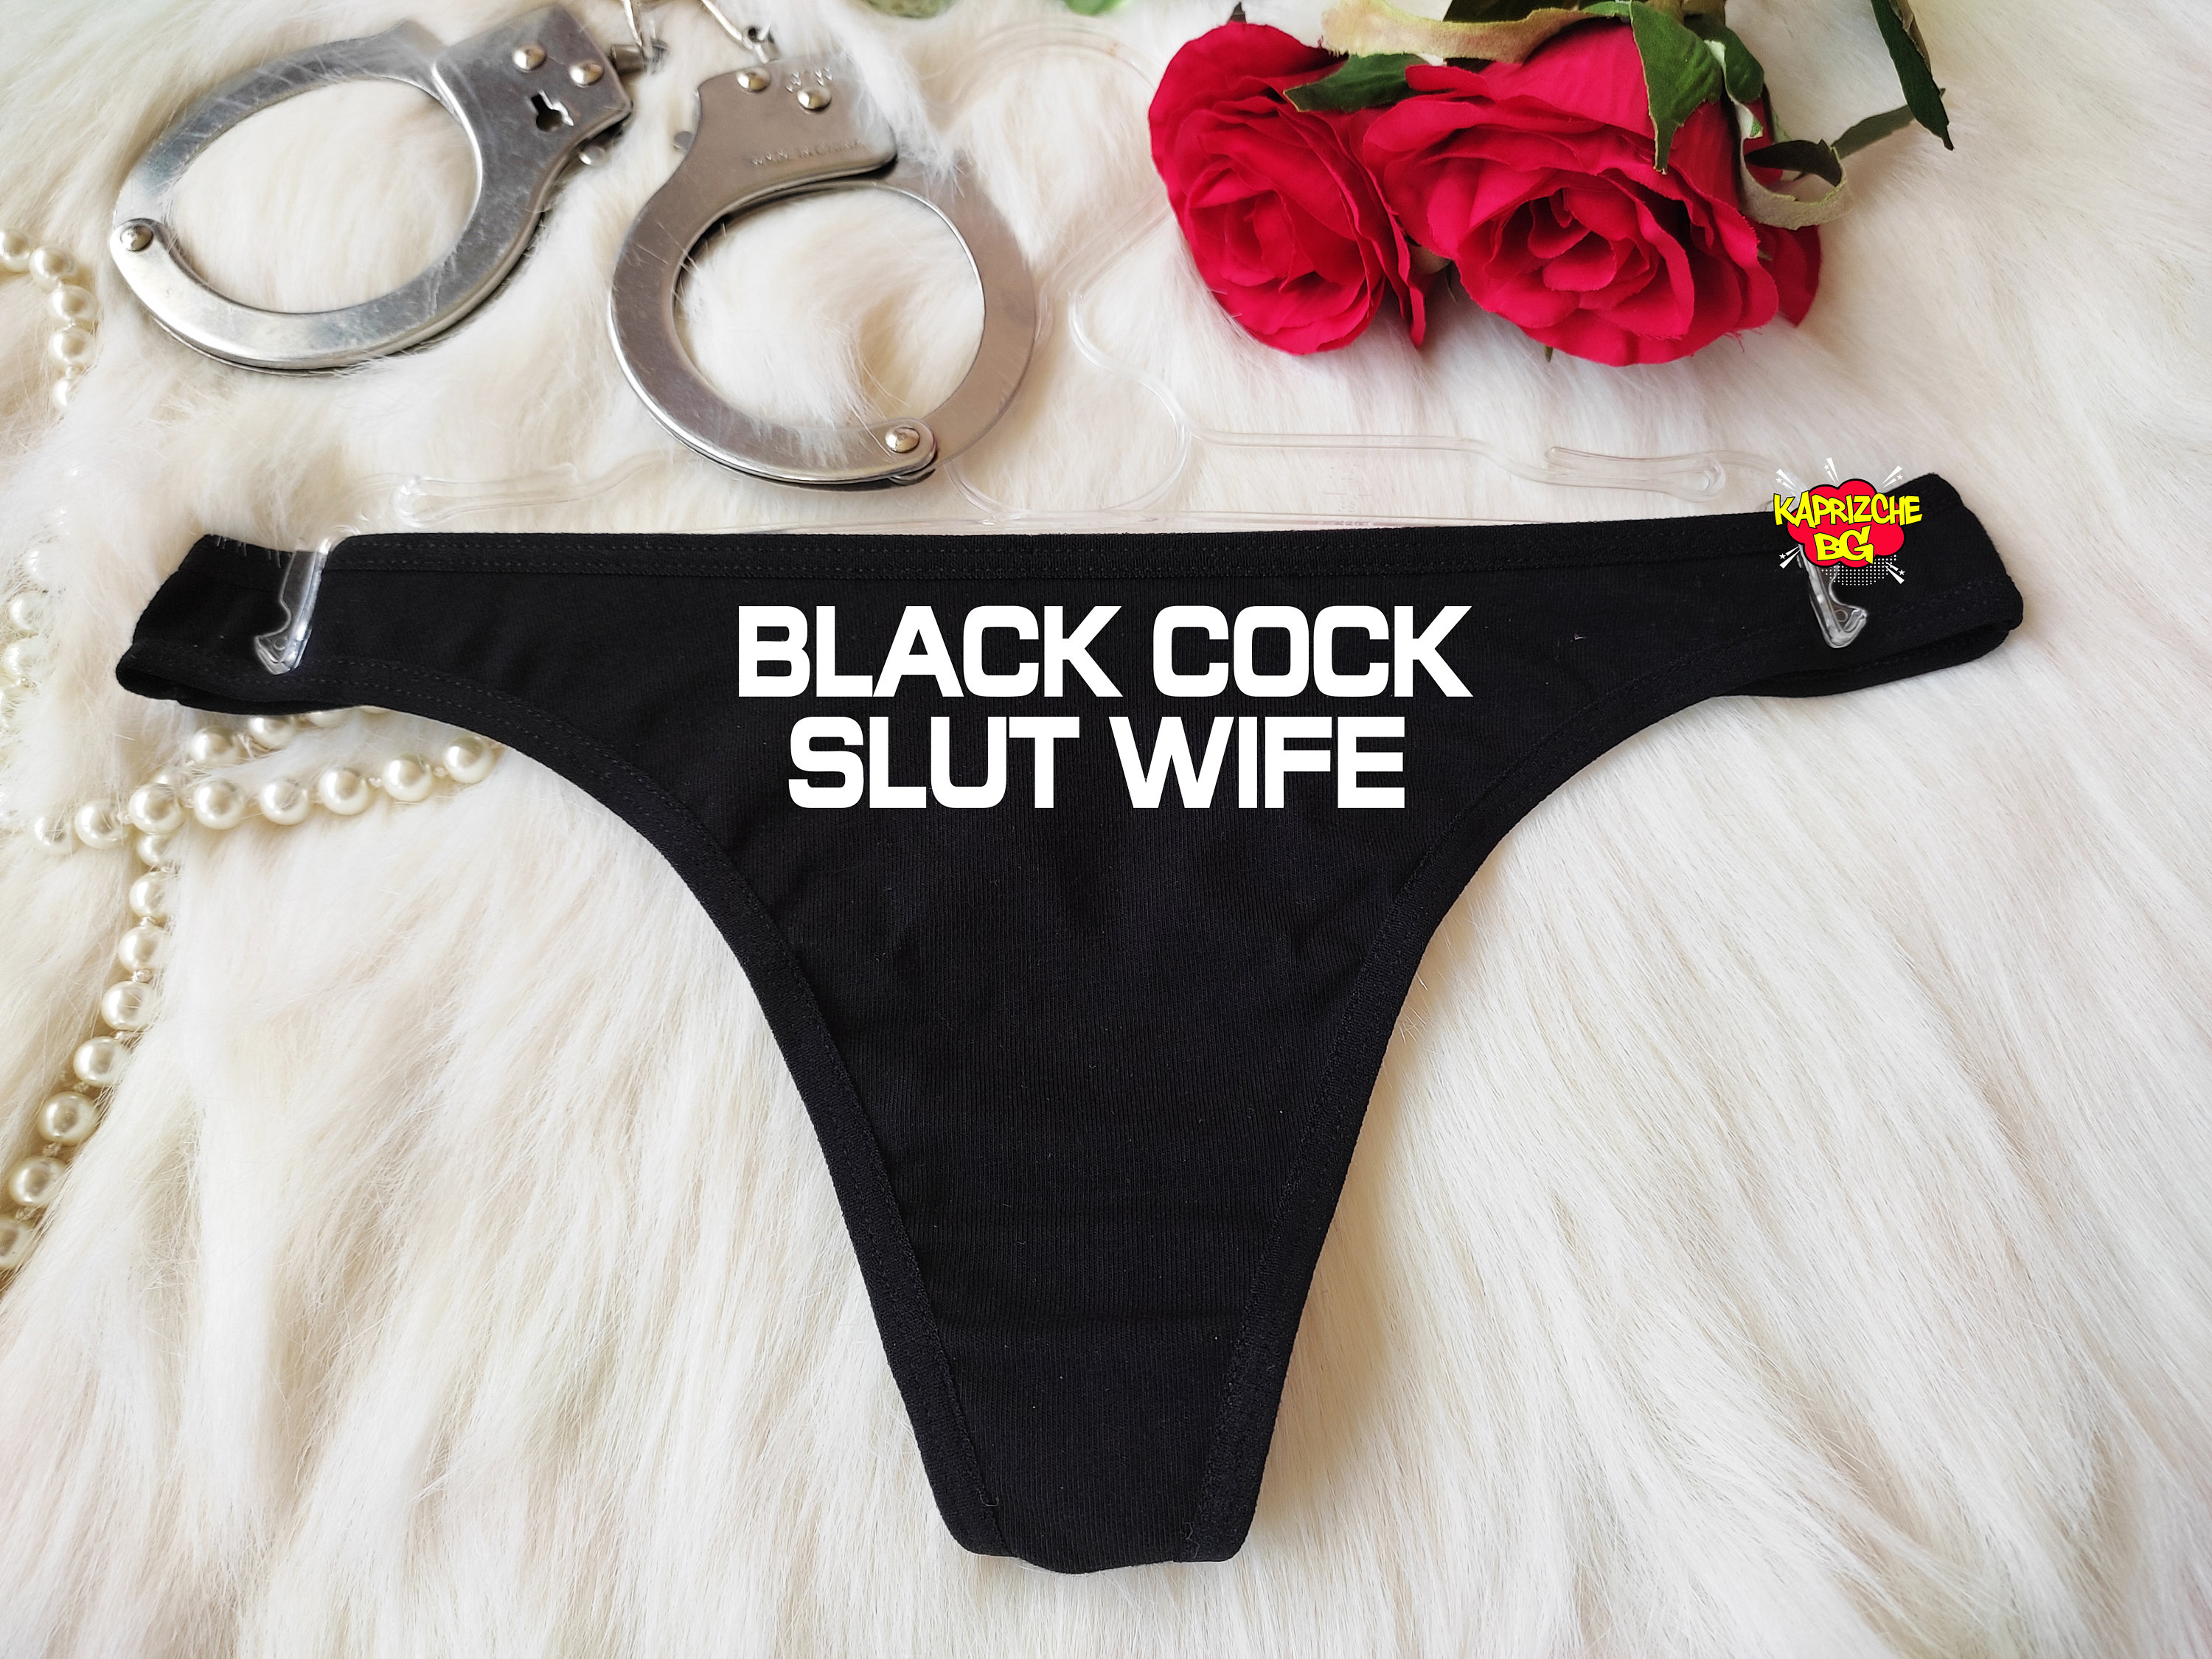 Black Cock Slut Wife Crotchess Thong Only BBC Panties Sexy image